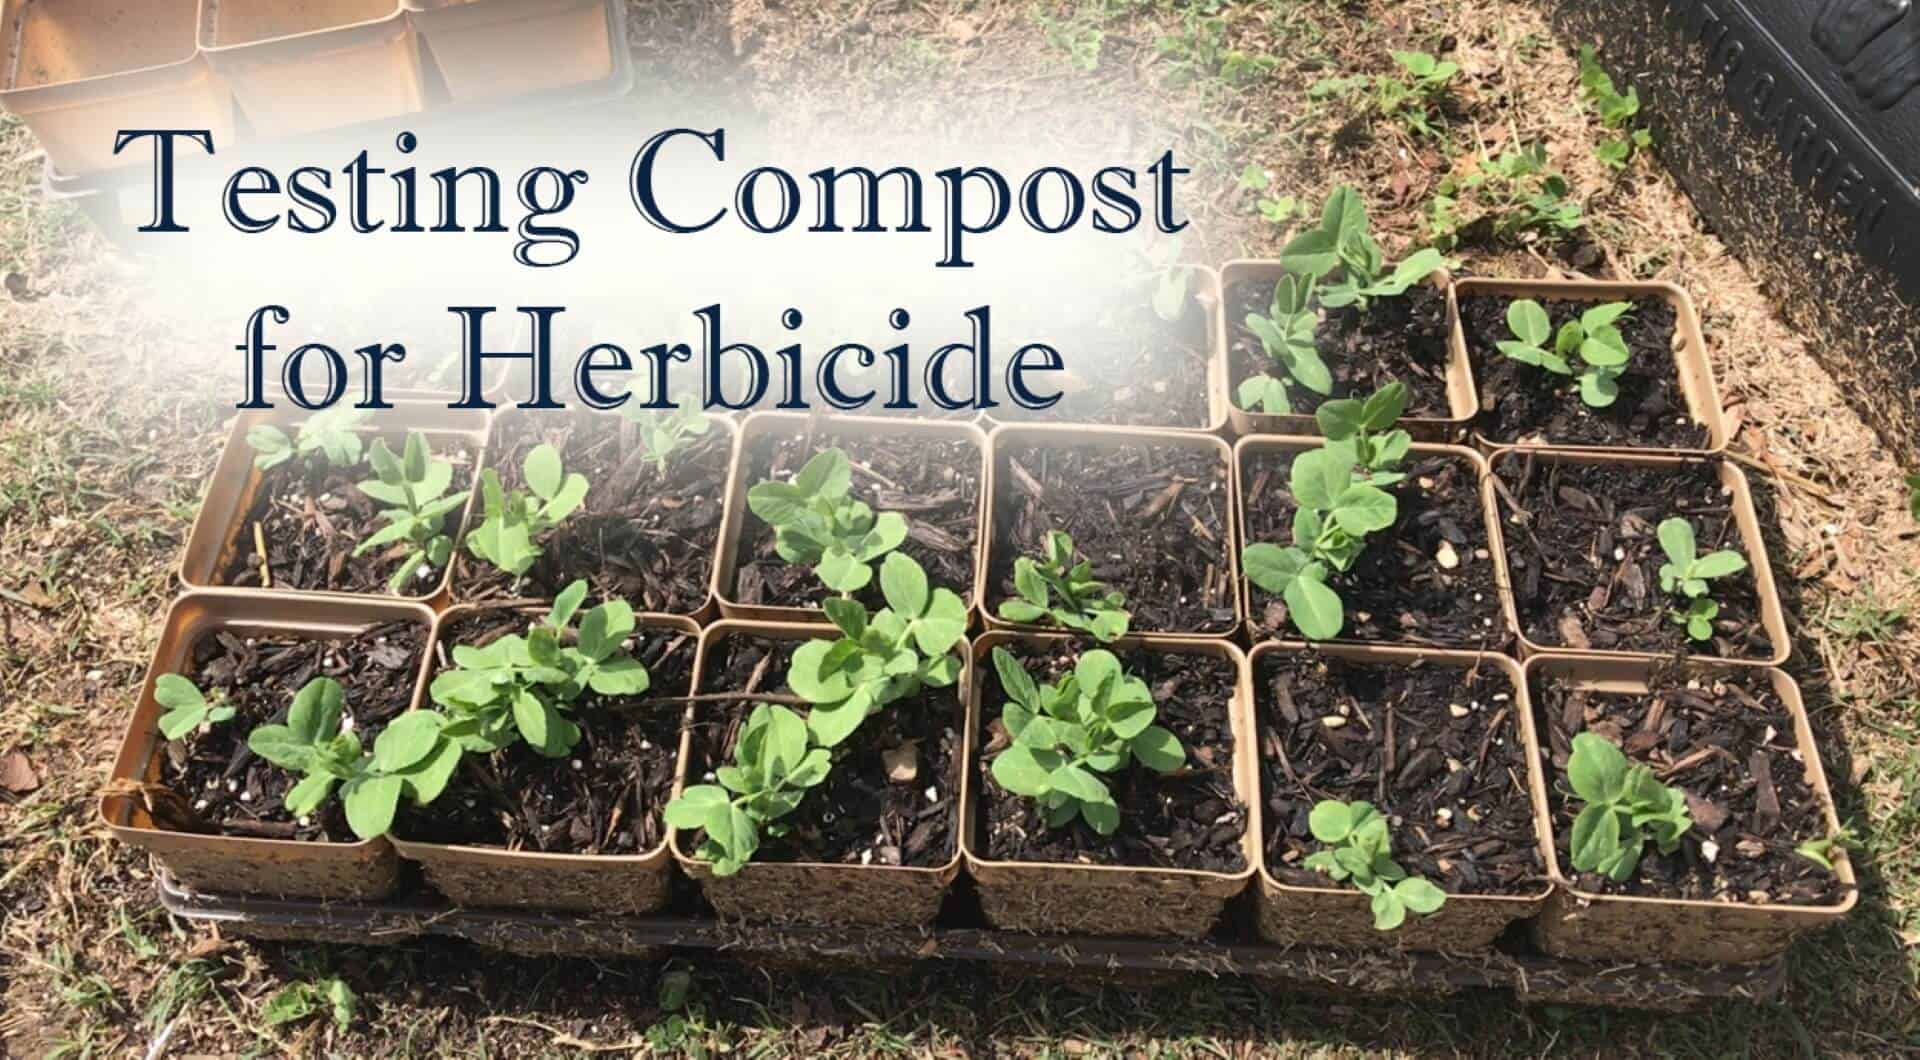 Testing compost for herbicide